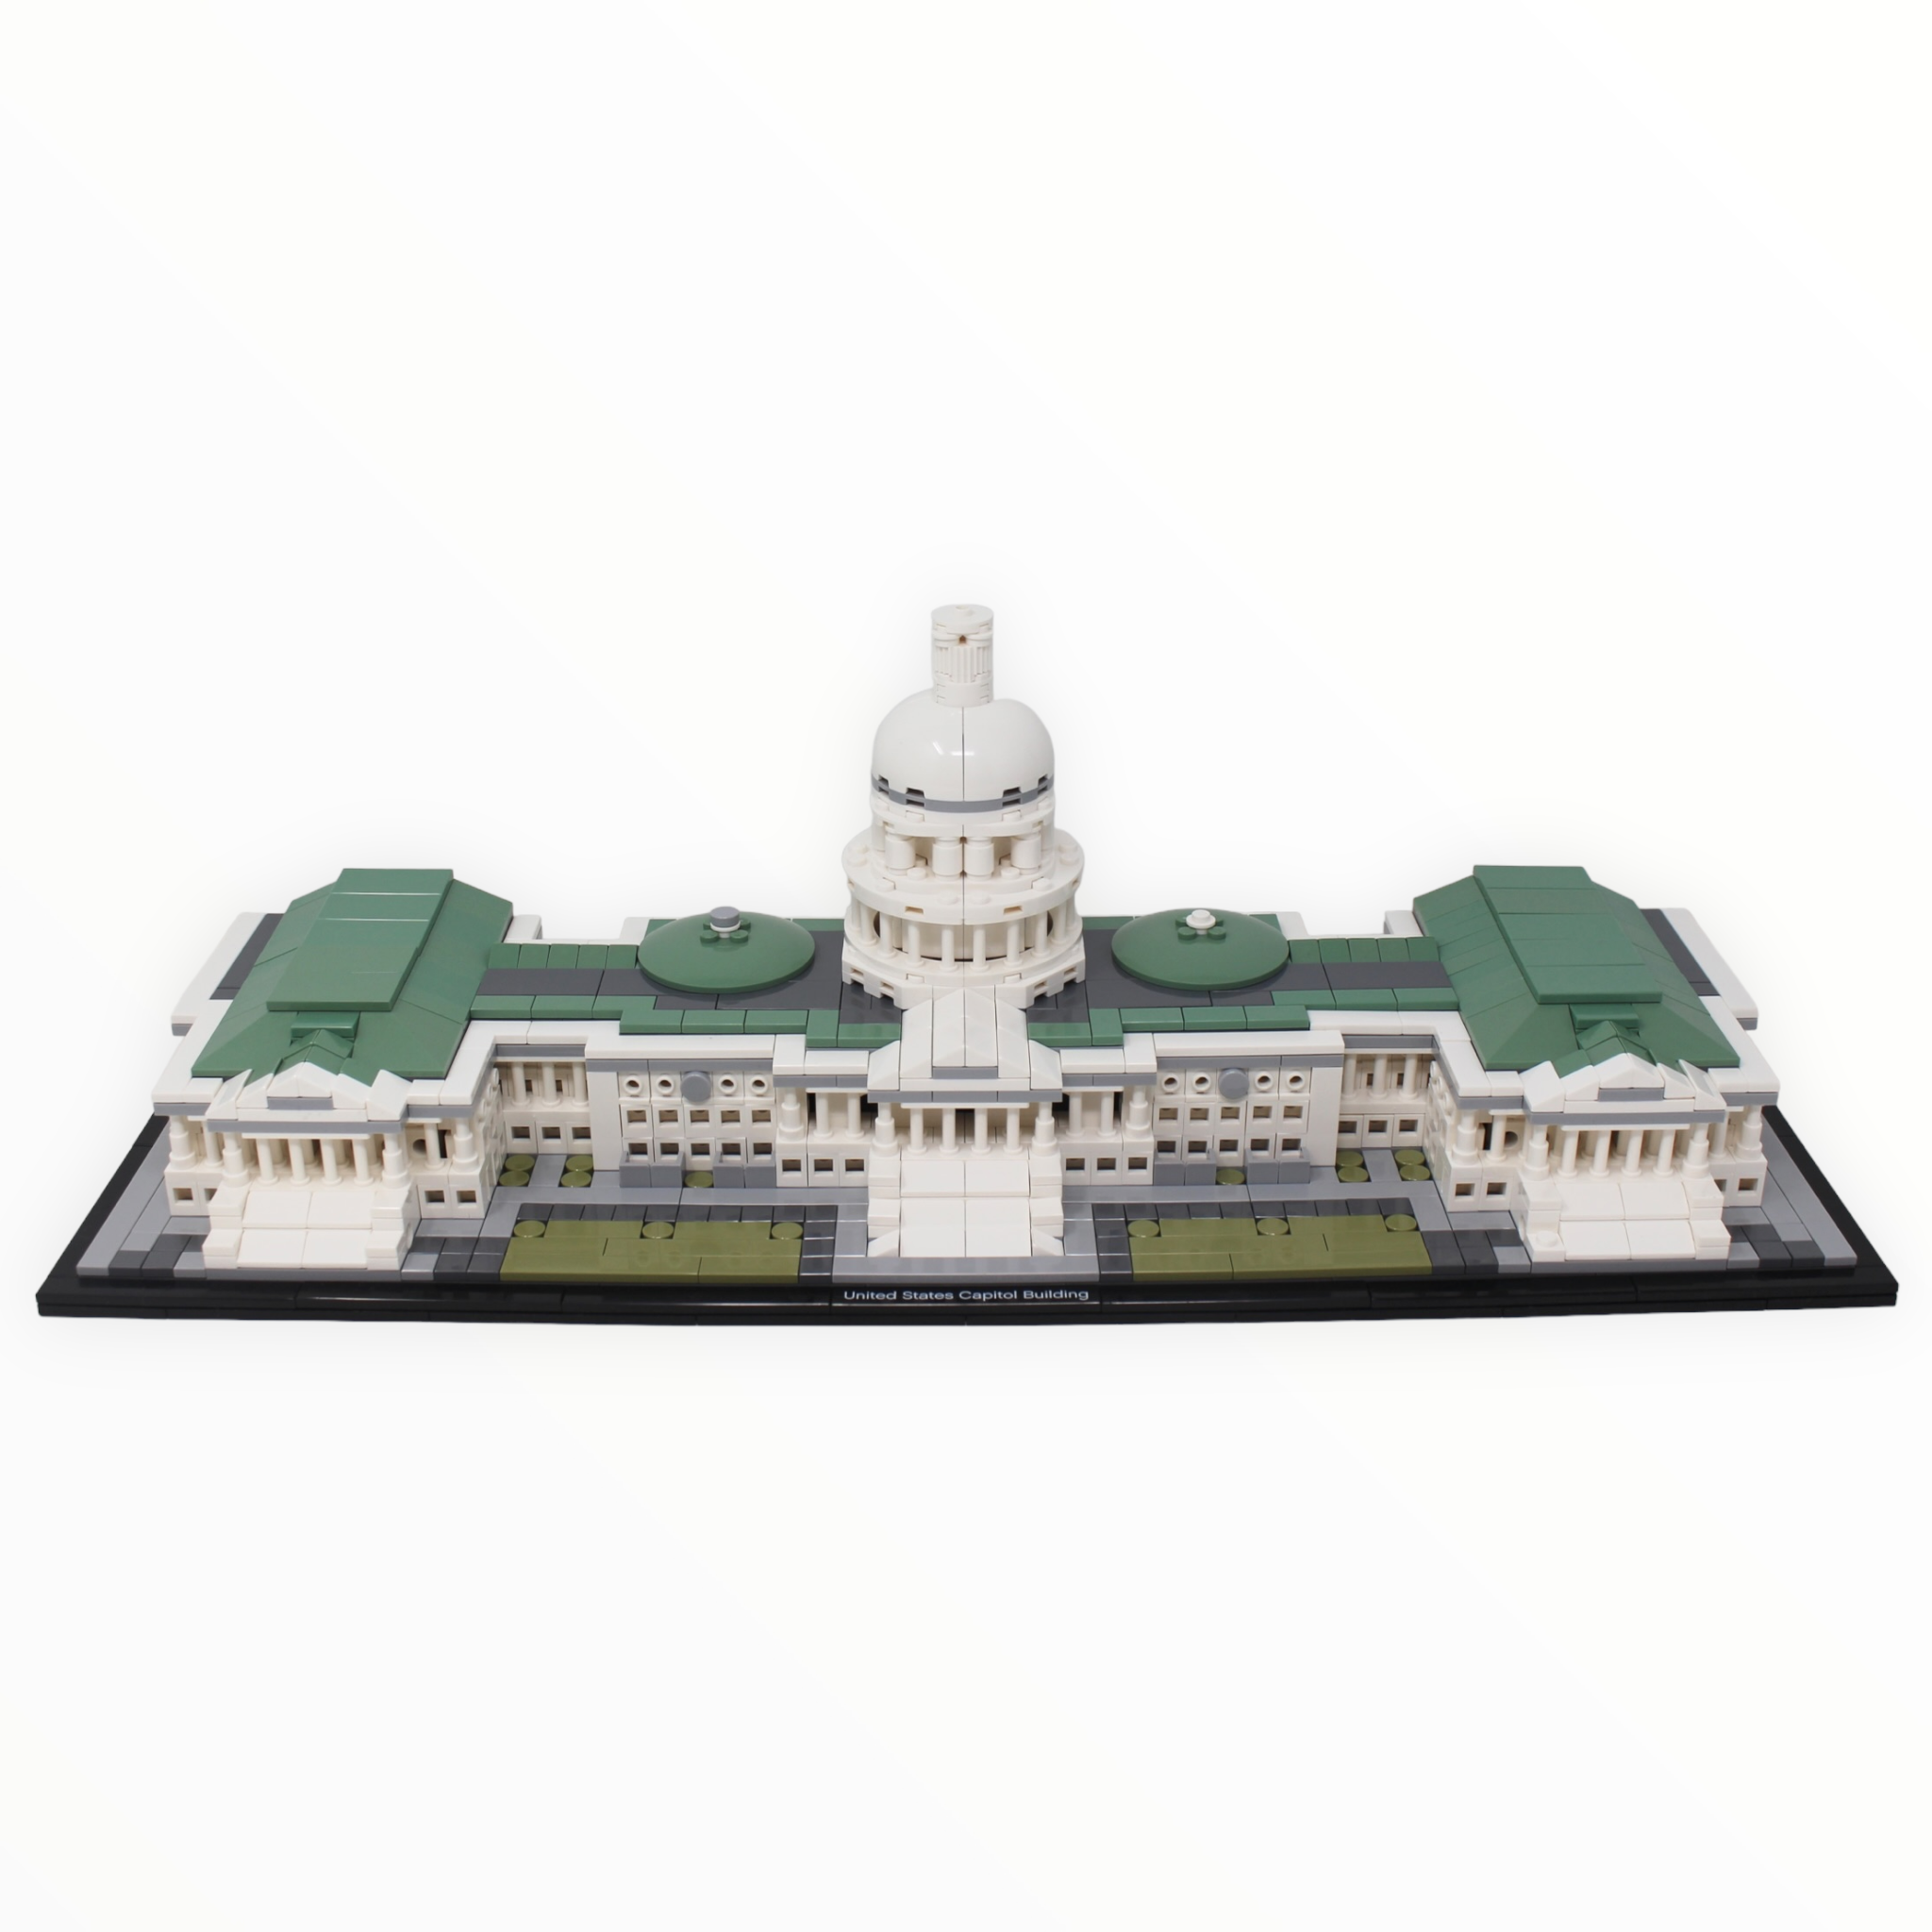 Used Set 21030 Architecture United States Capitol Building